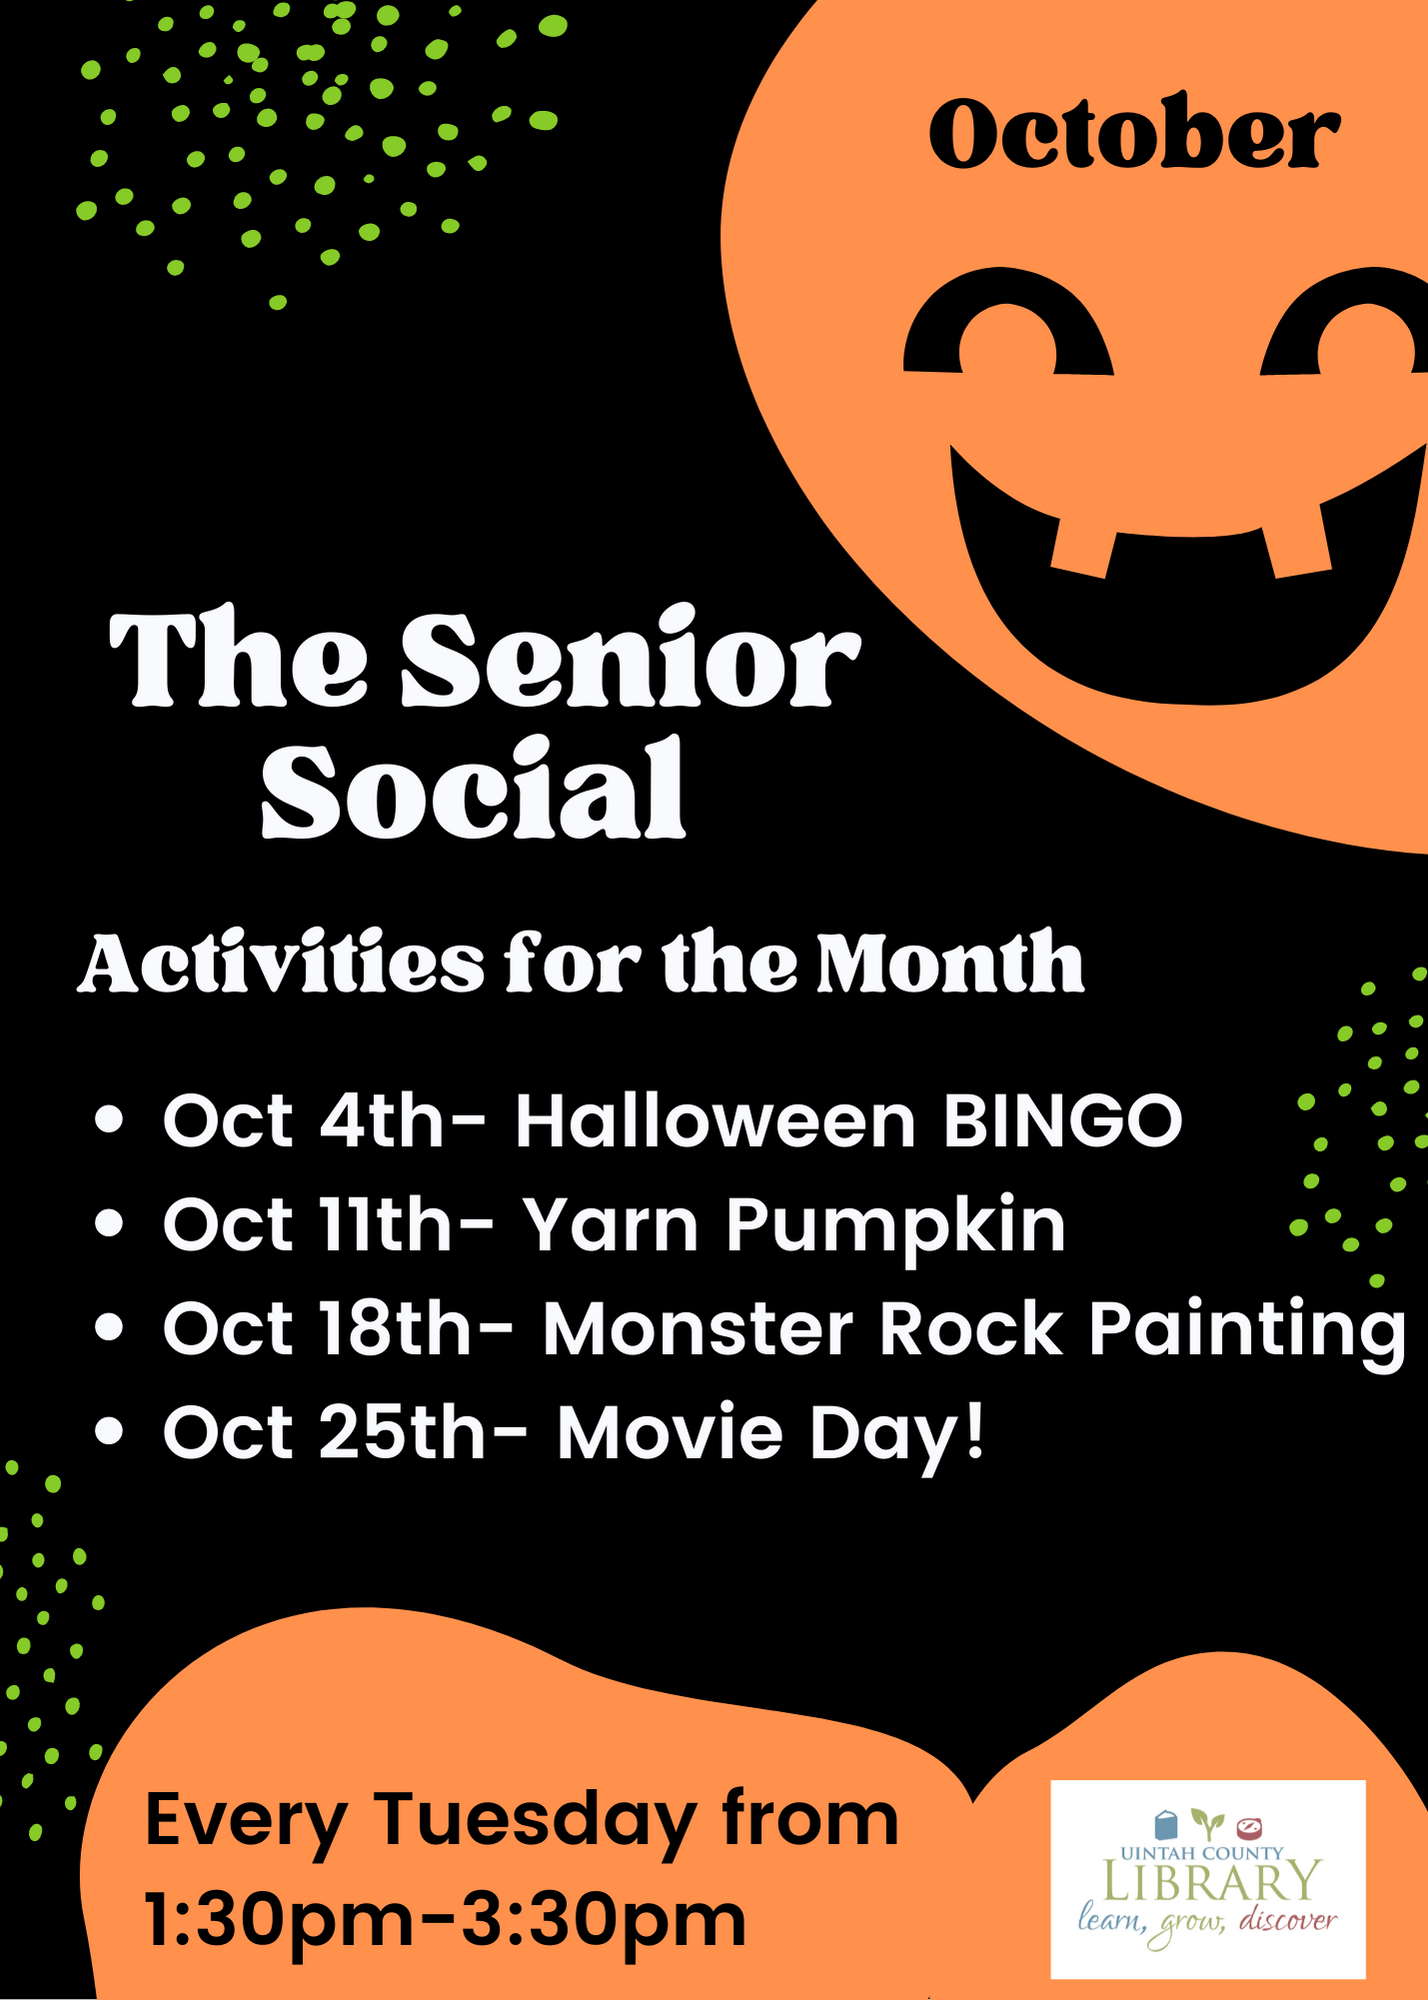 The Senior Social Activities for the Month | Oct 4th- Halloween BINGO Oct 11th- Yarn Pumpkin  Oct 18th- Monster Rock Painting Oct 25th- Movie Day! | Every Tuesday from 1:30pm-3:30pm